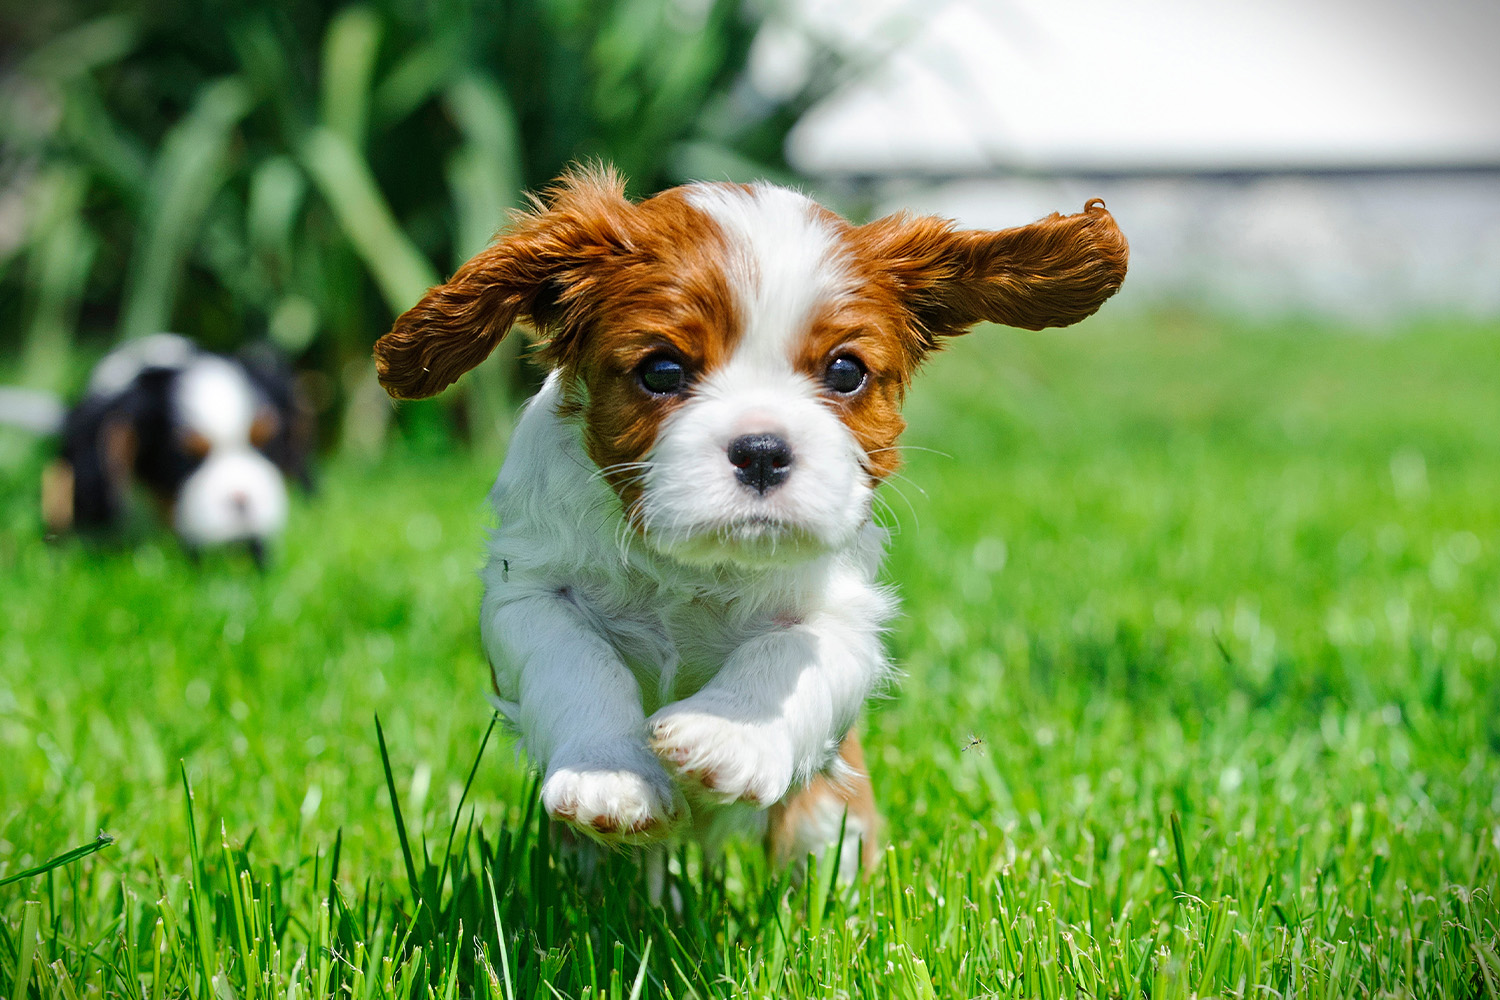 The New Puppy Checklist: A New Dog Owner’s Guide